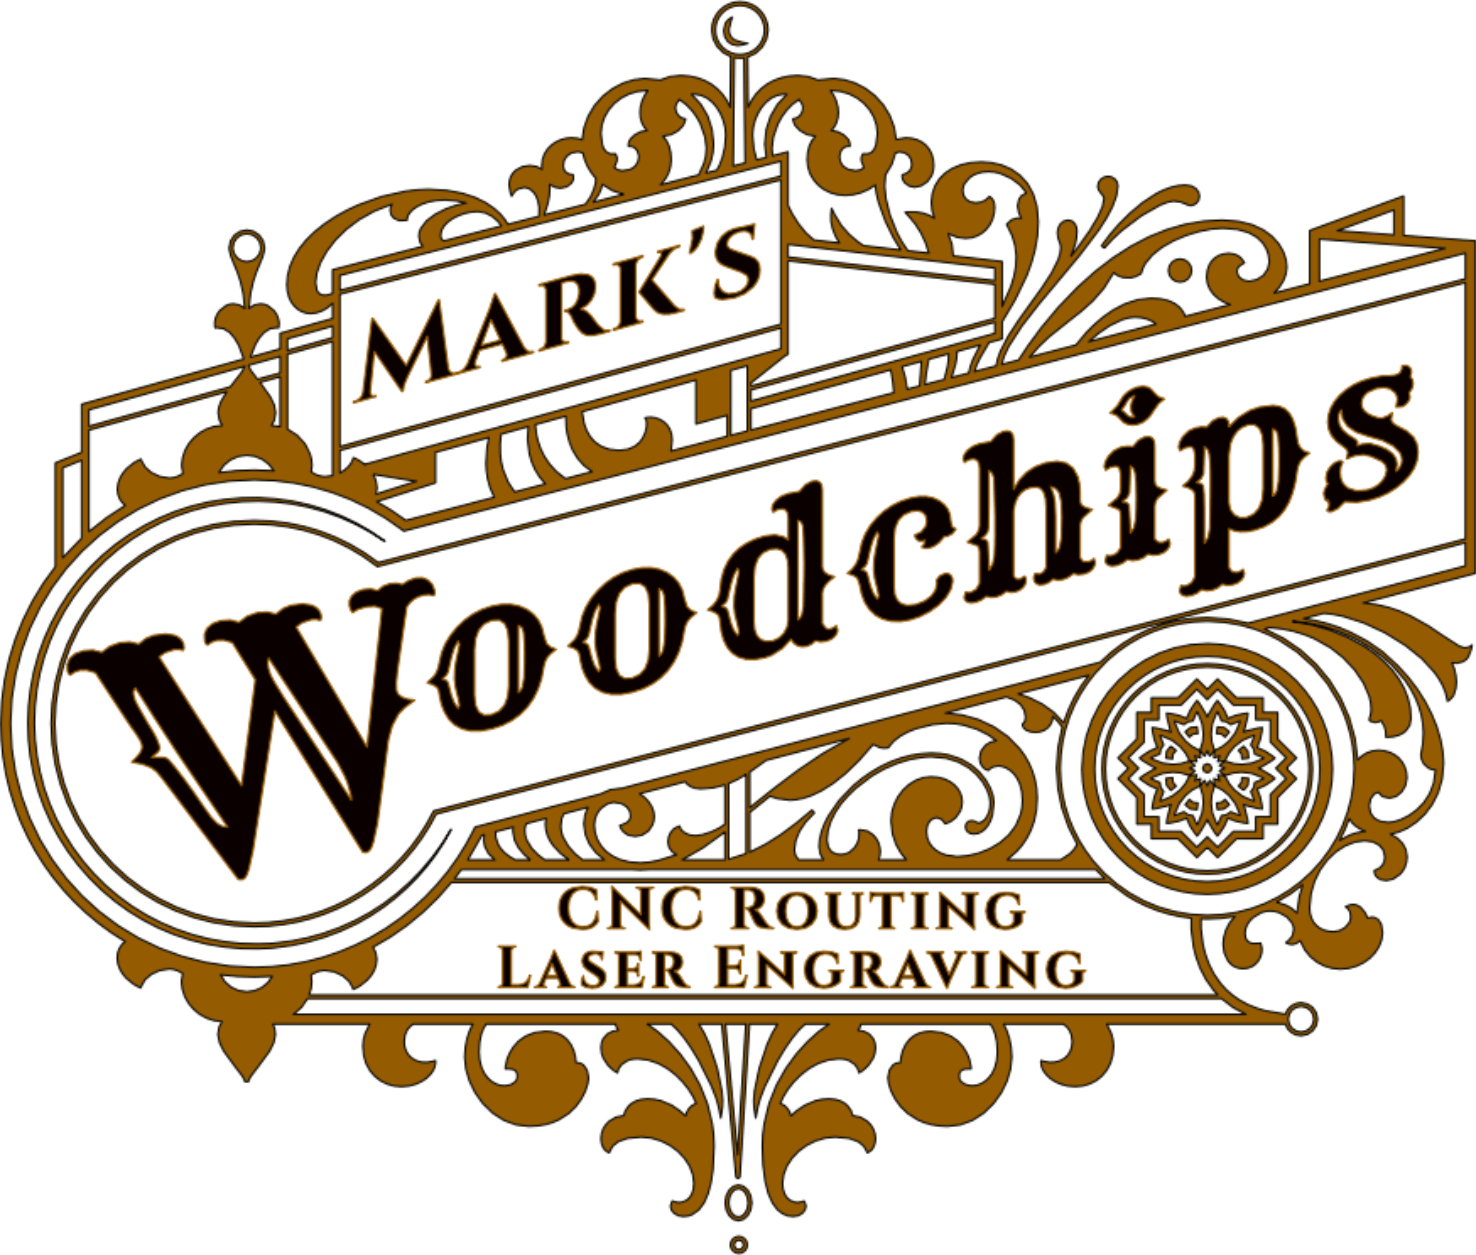 Mark's Wood Chips